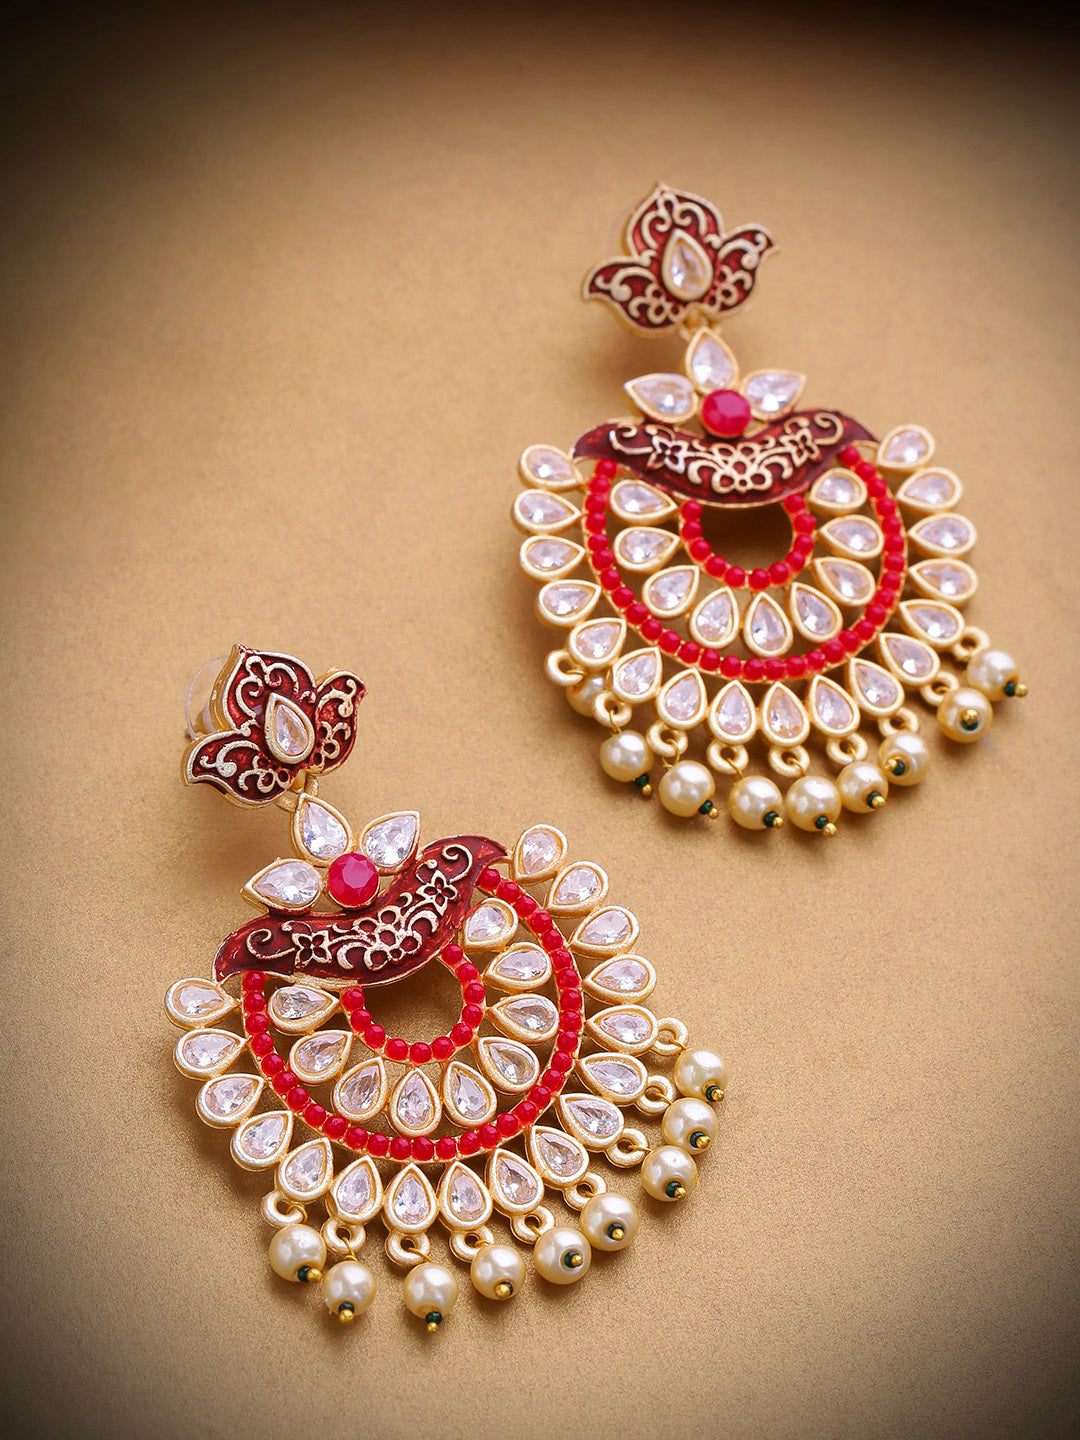 Gold-Plated Stones Studded Meenakari Chandbali Earrings In Red and Maroon Color with Pearls Drop